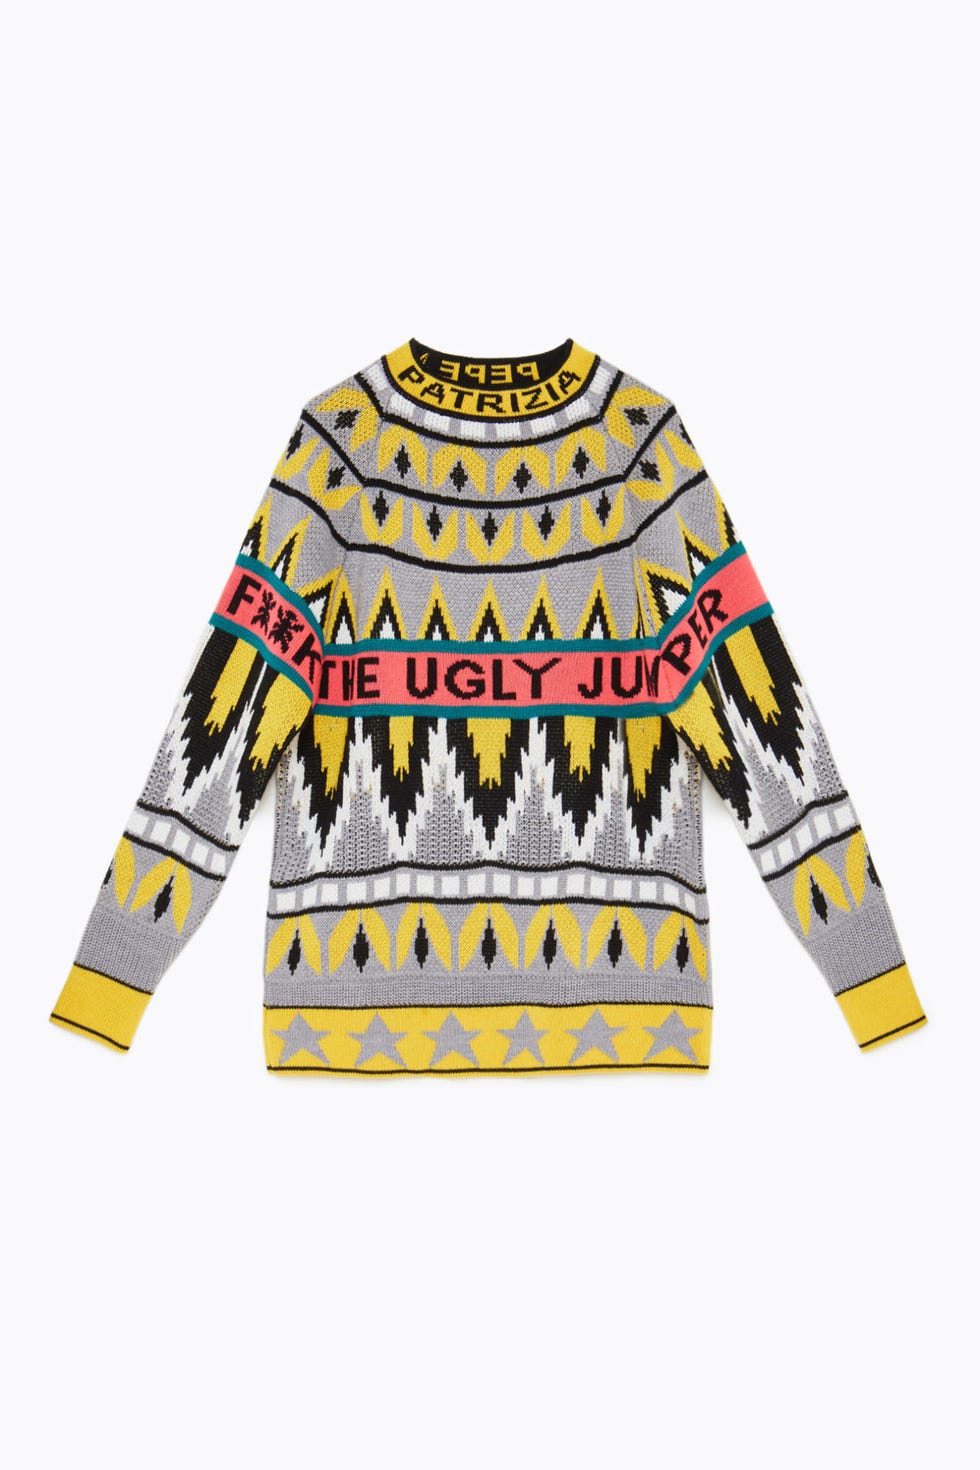 Clothing, Sleeve, Yellow, Outerwear, T-shirt, Long-sleeved t-shirt, Crop top, Top, Sweater, Neck, 